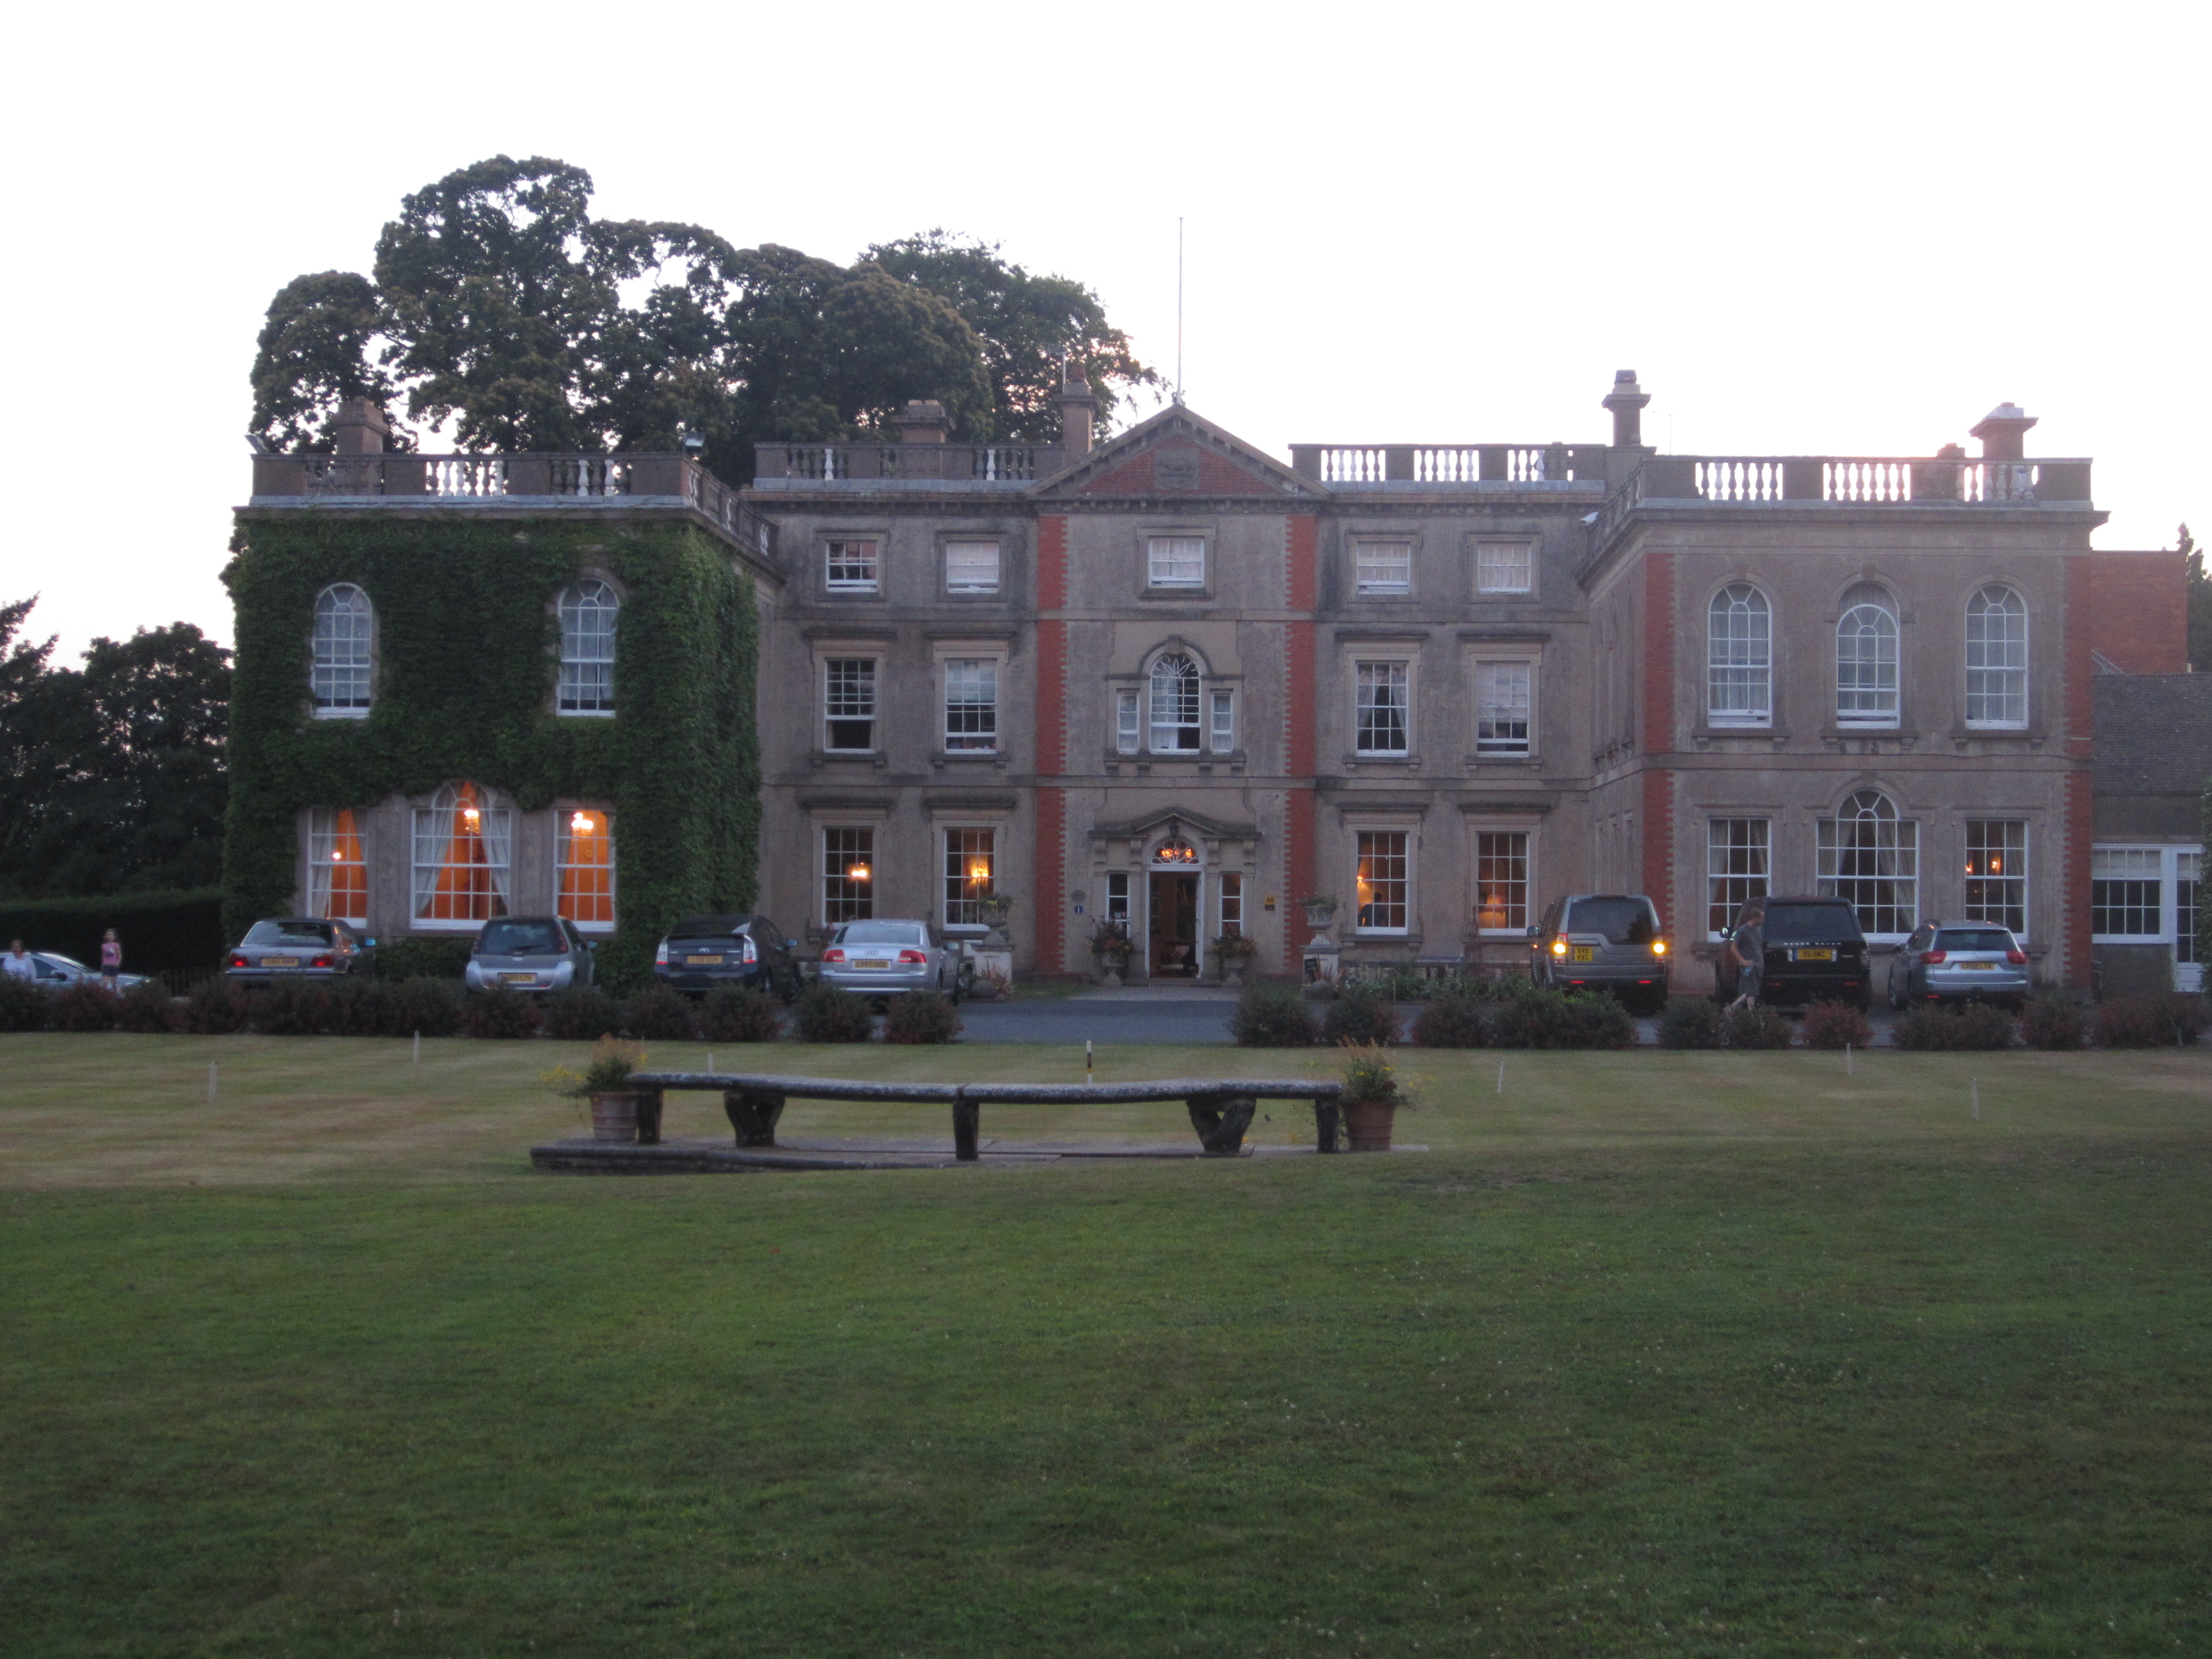 The Elms Hotel in Worcestershire